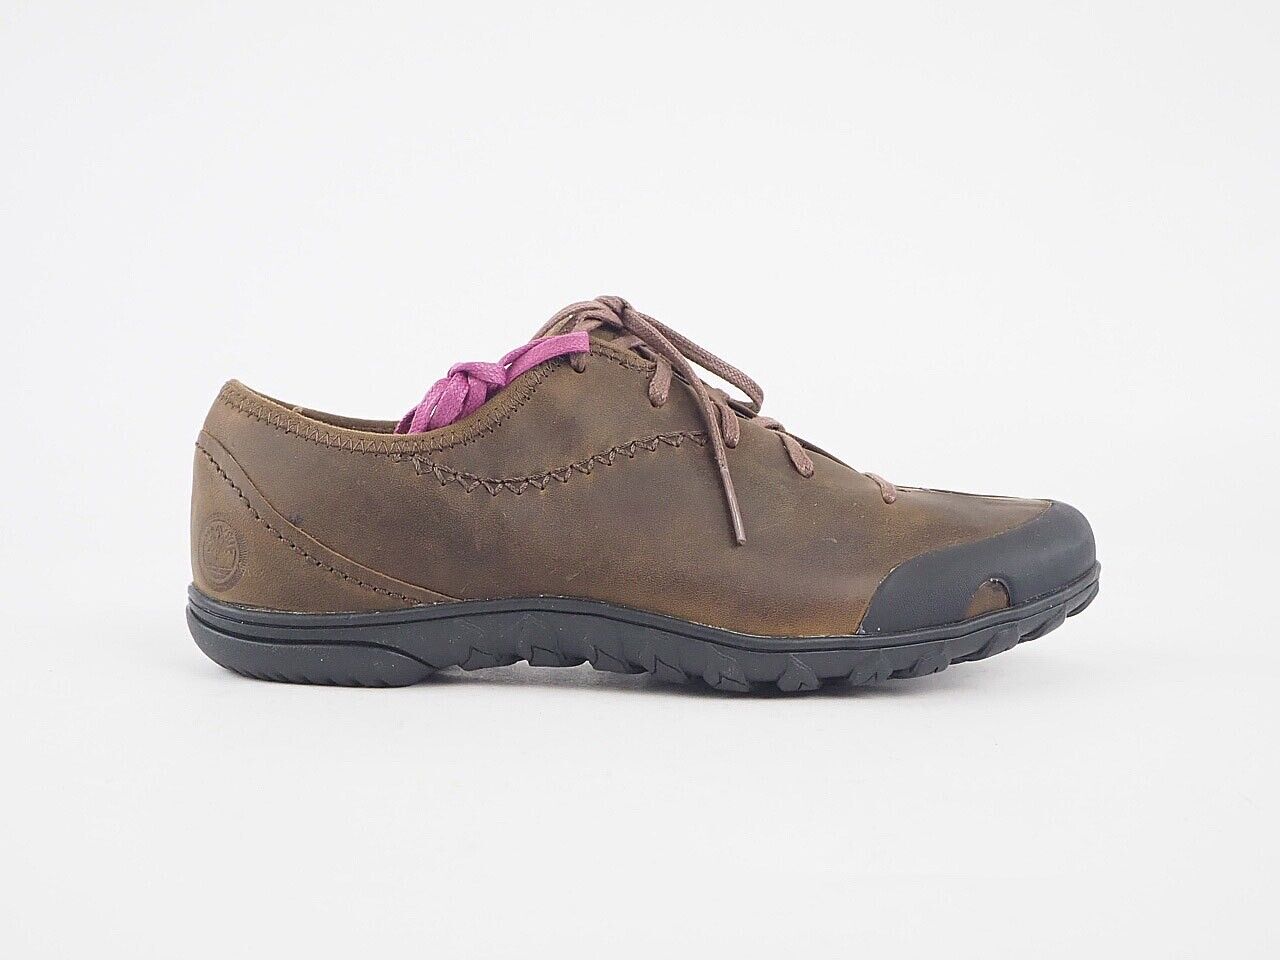 Womens Timberland Ntch Oxford 19653 Brown Leather Walking Waterproof Light Shoes - London Top Style